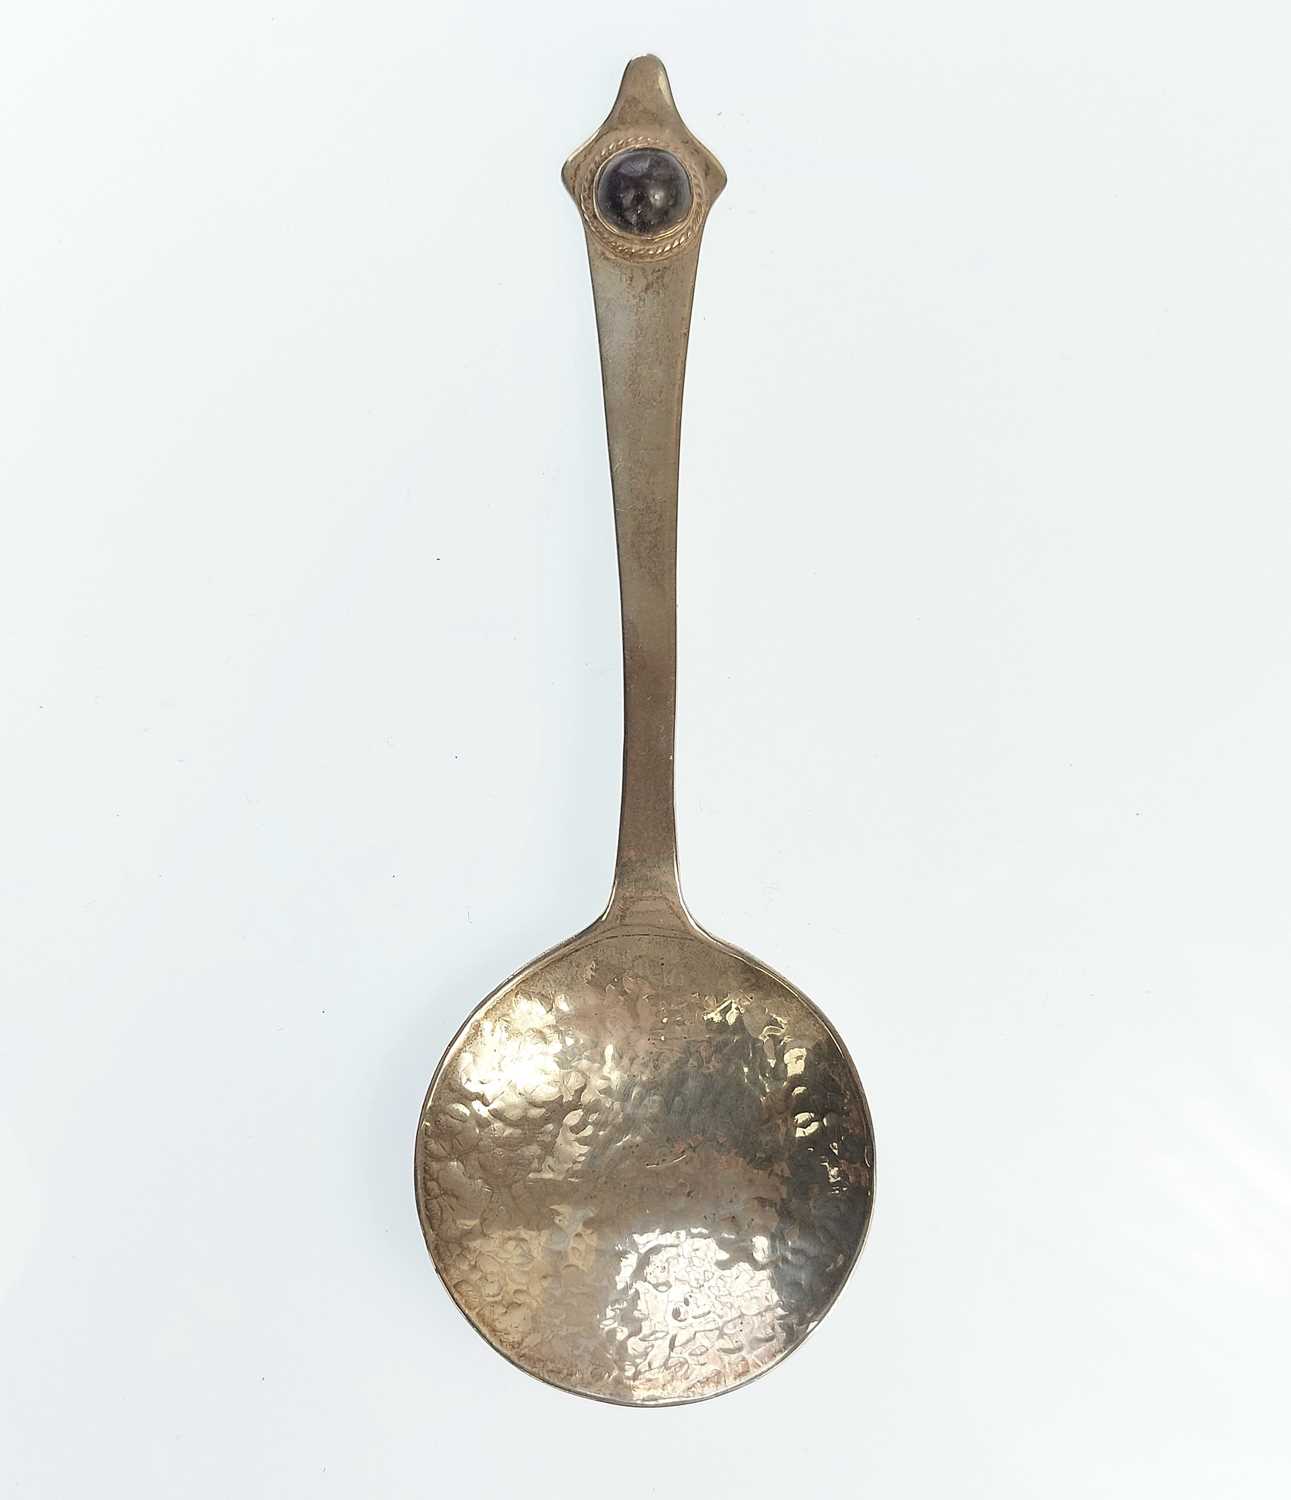 Lot 50 - An Arts & Crafts silver spoon set with a Blue John cabochon by Sandheim Brothers.